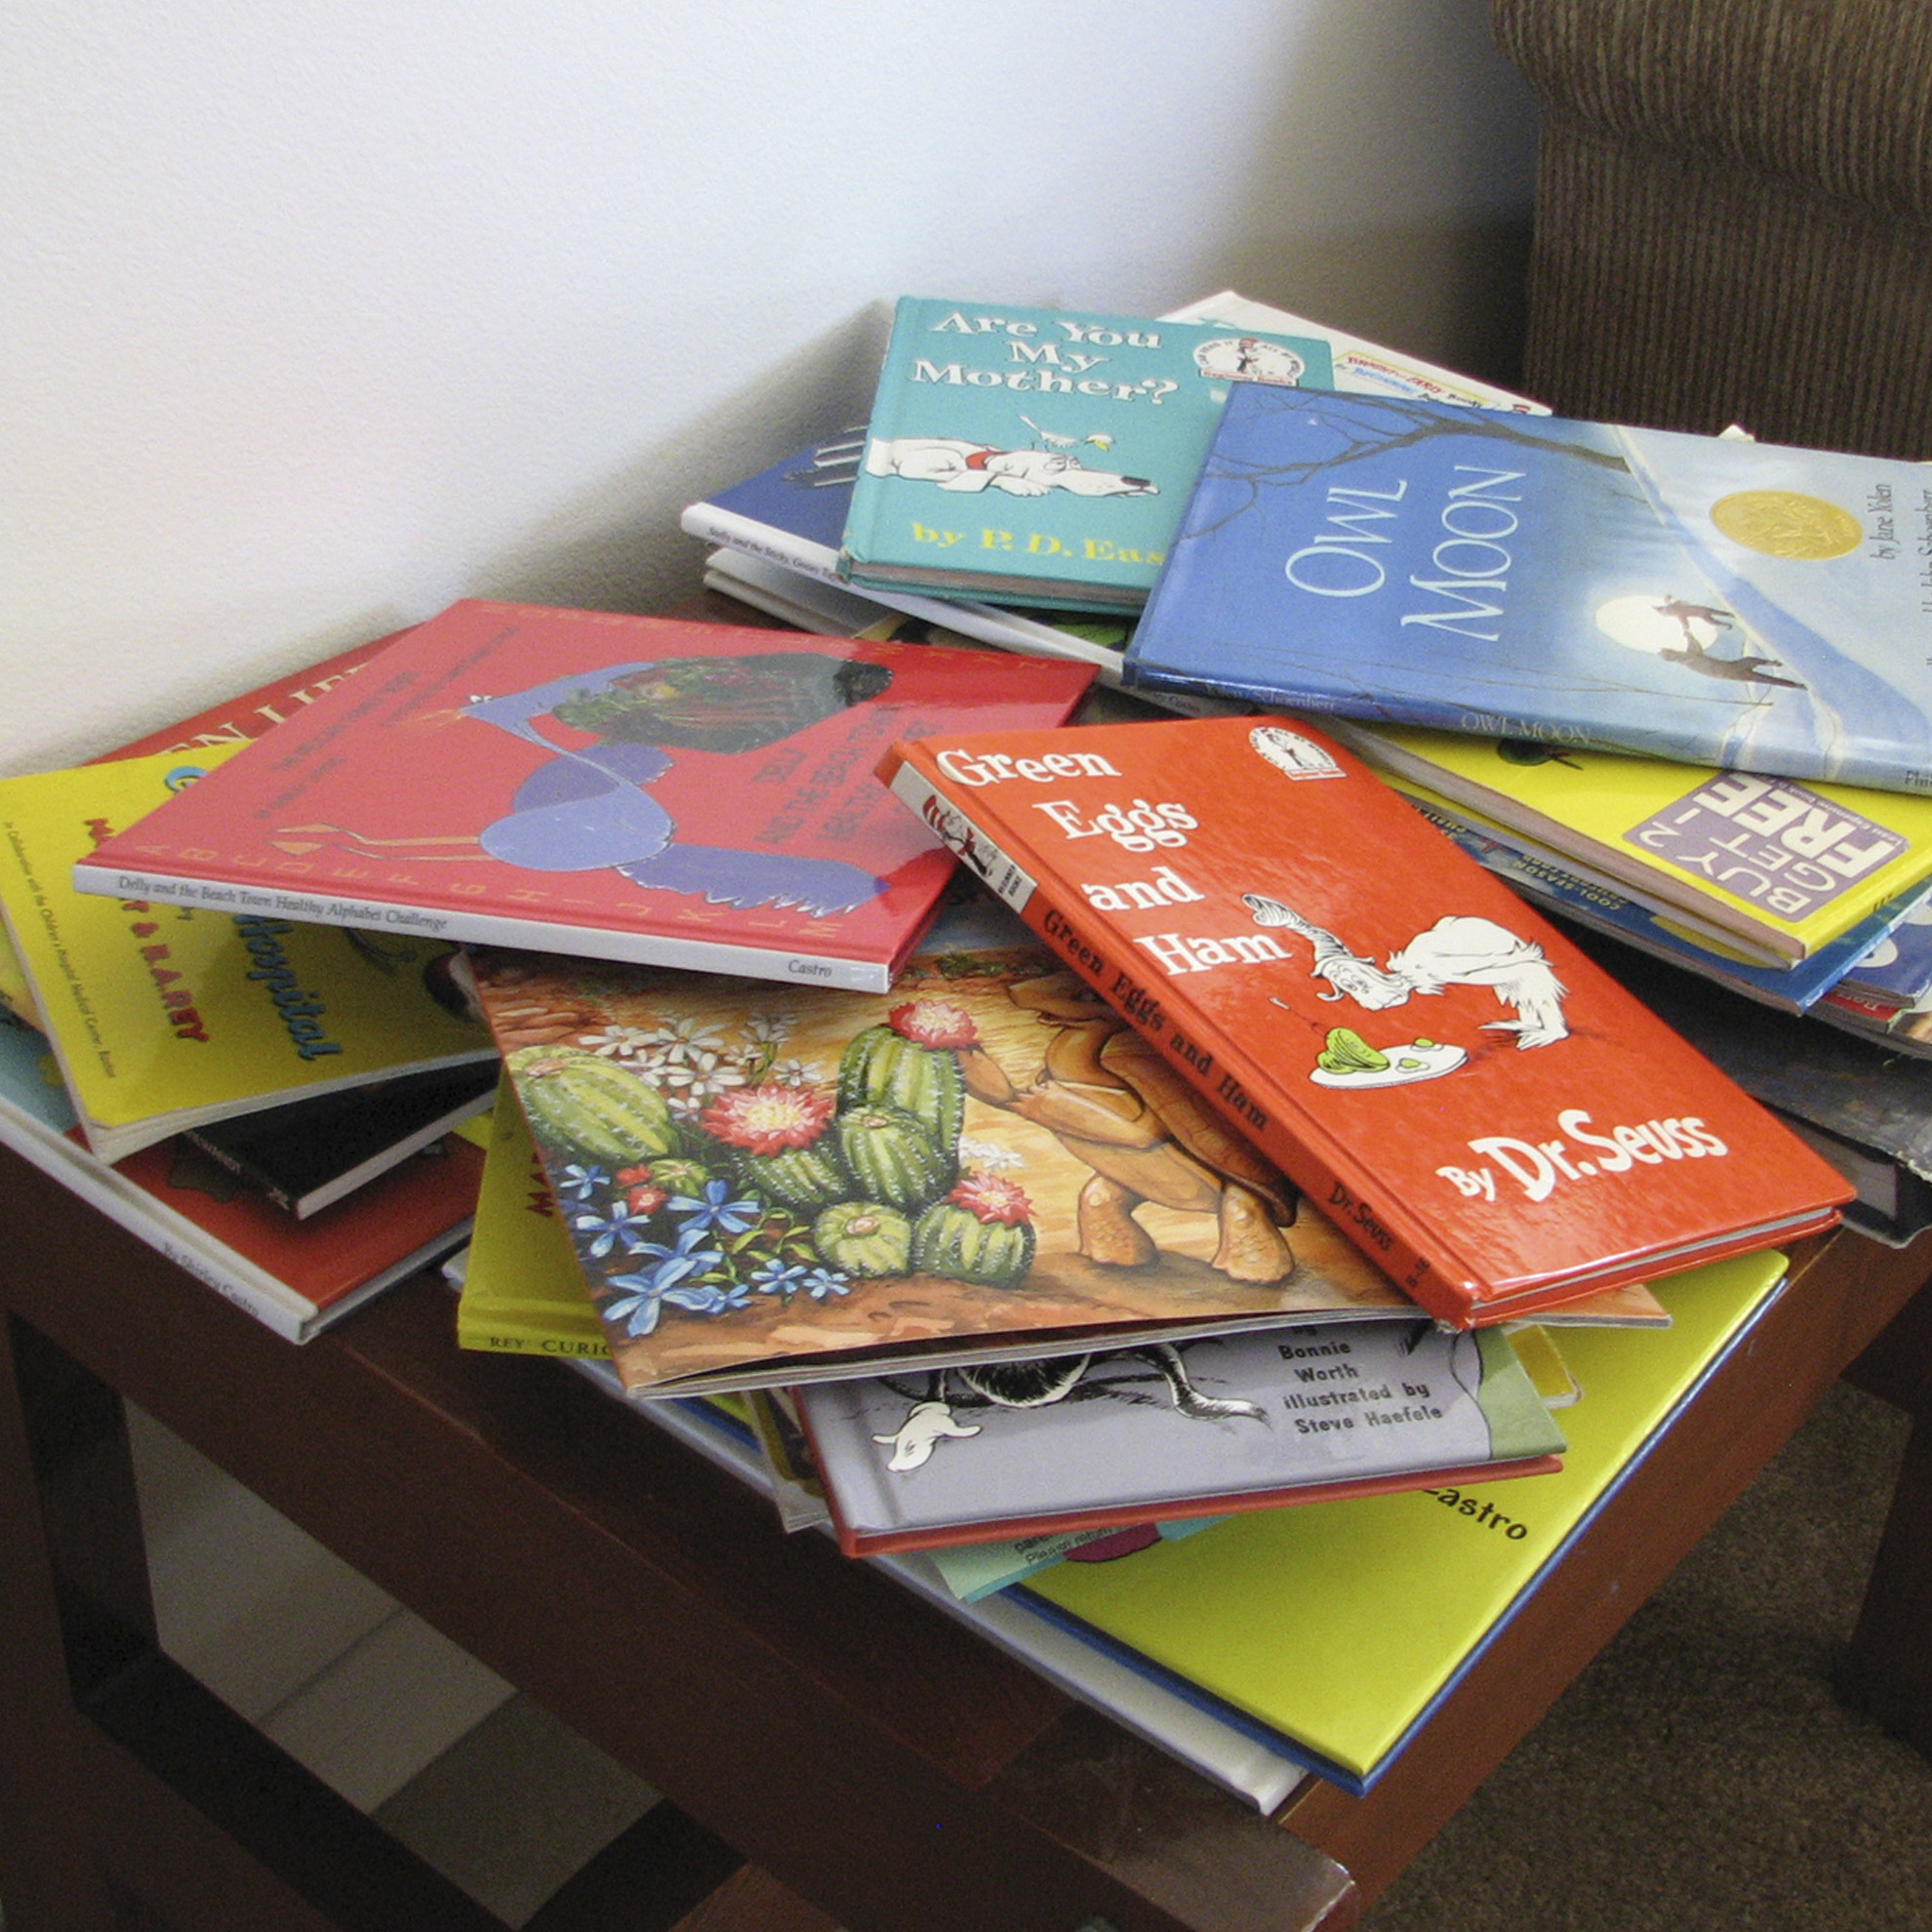 Pelican Family Series Children's Picture Books Blog Post 28 create a reader friendly home books on a table